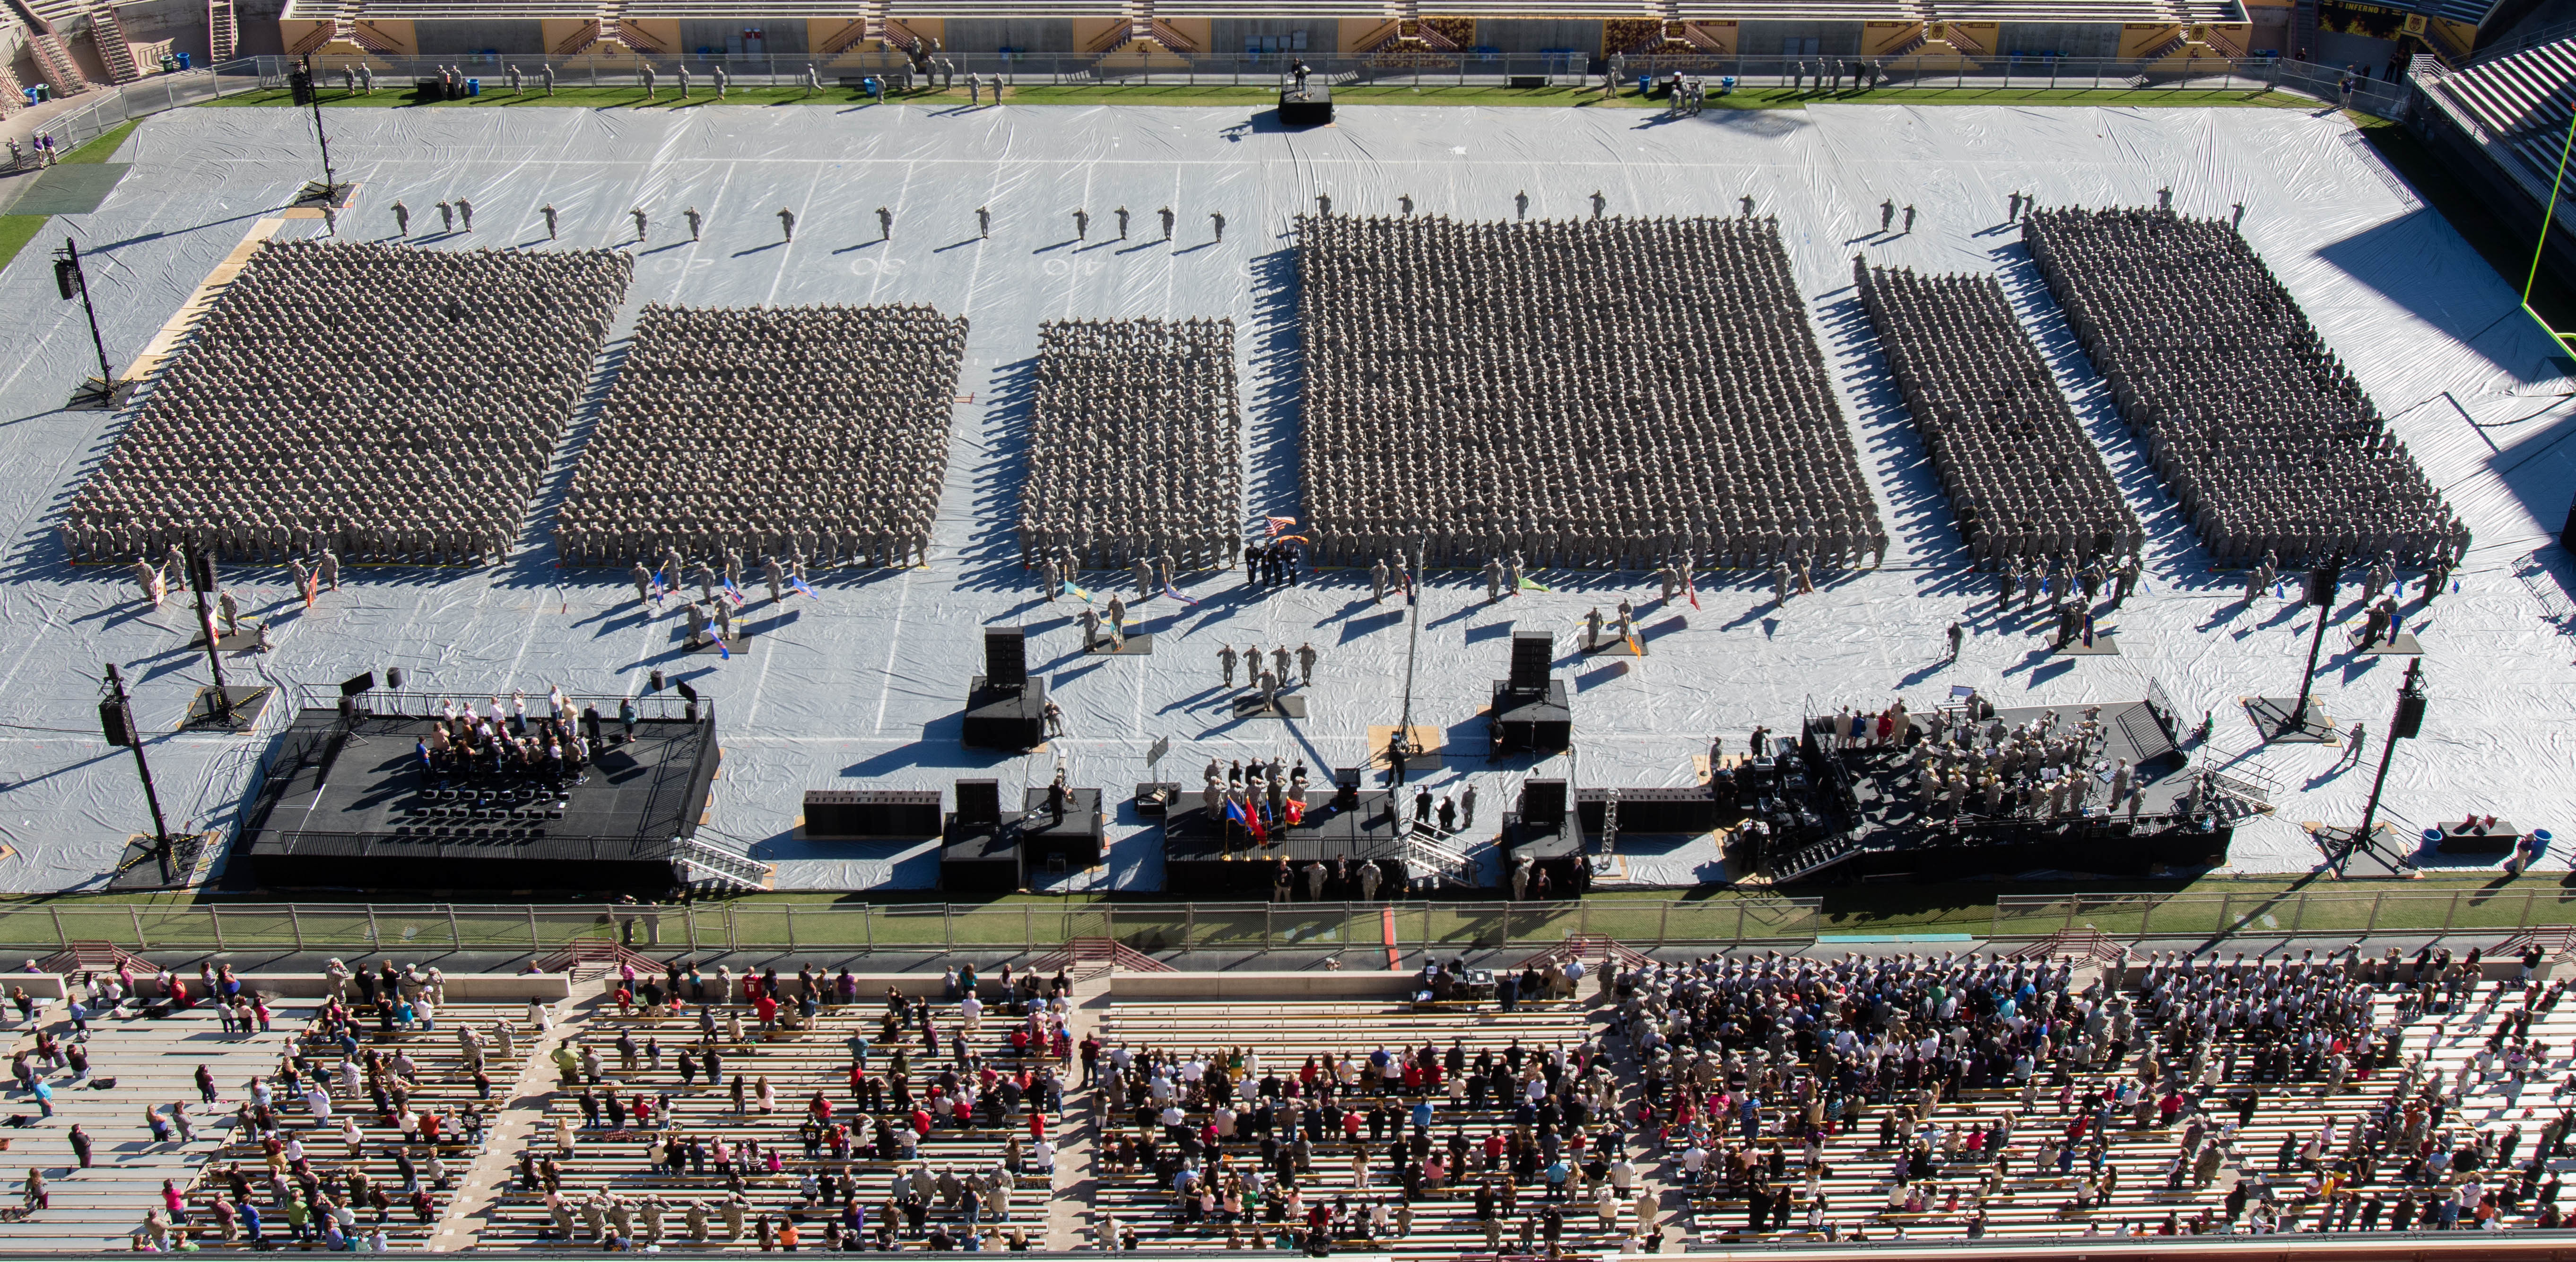 Army National Guard. bird's-eye view of soldiers' information on a football field. audience in the stage viewing the event